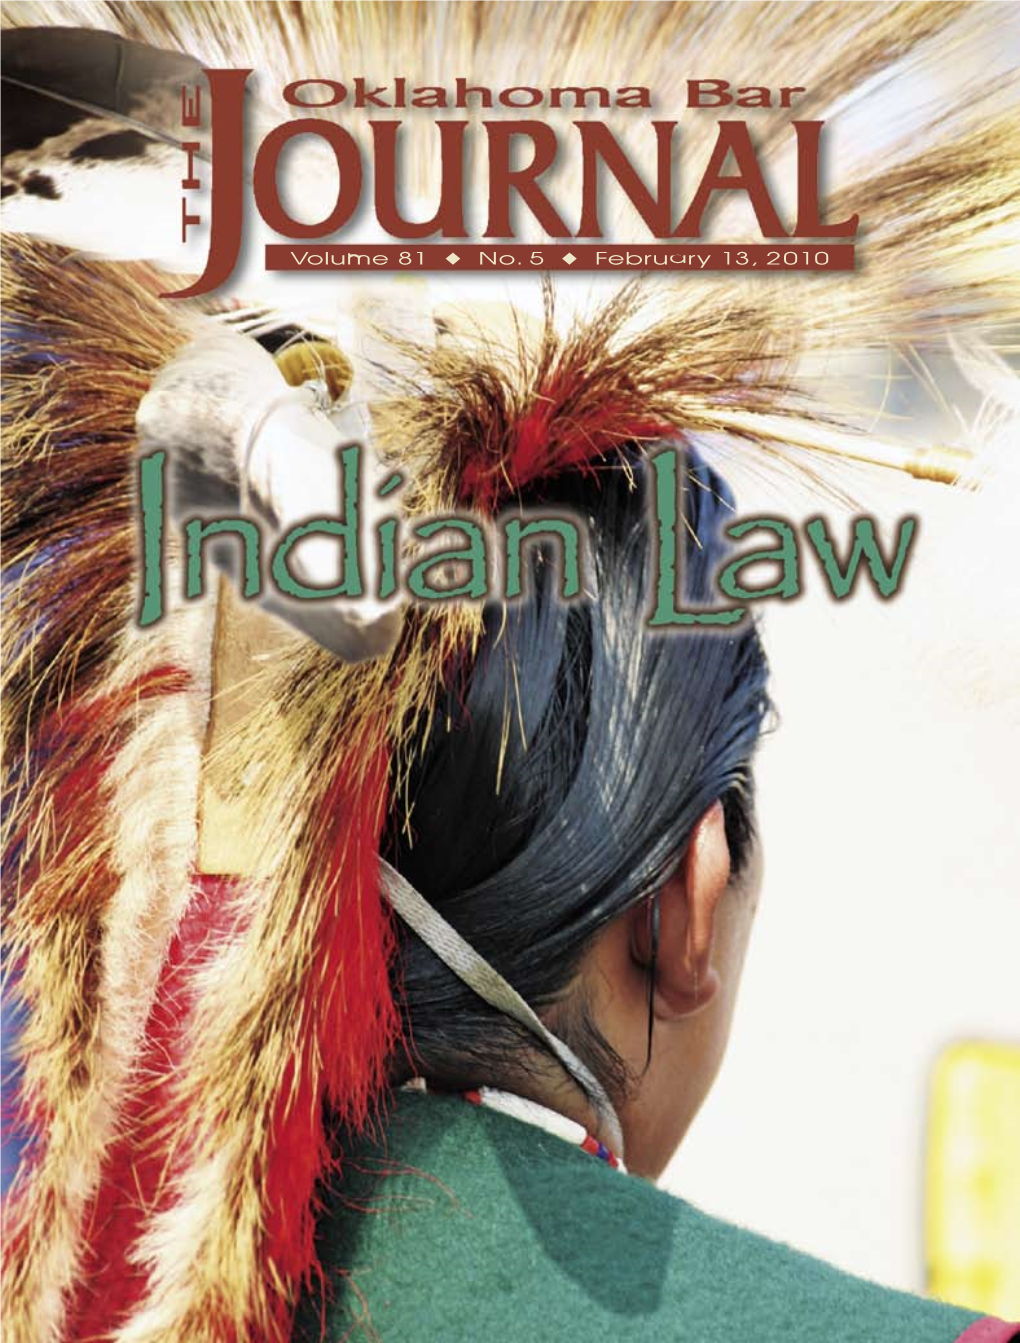 Indian Law Editor: Leslie Taylor Contents February 13, 2010 • Vol